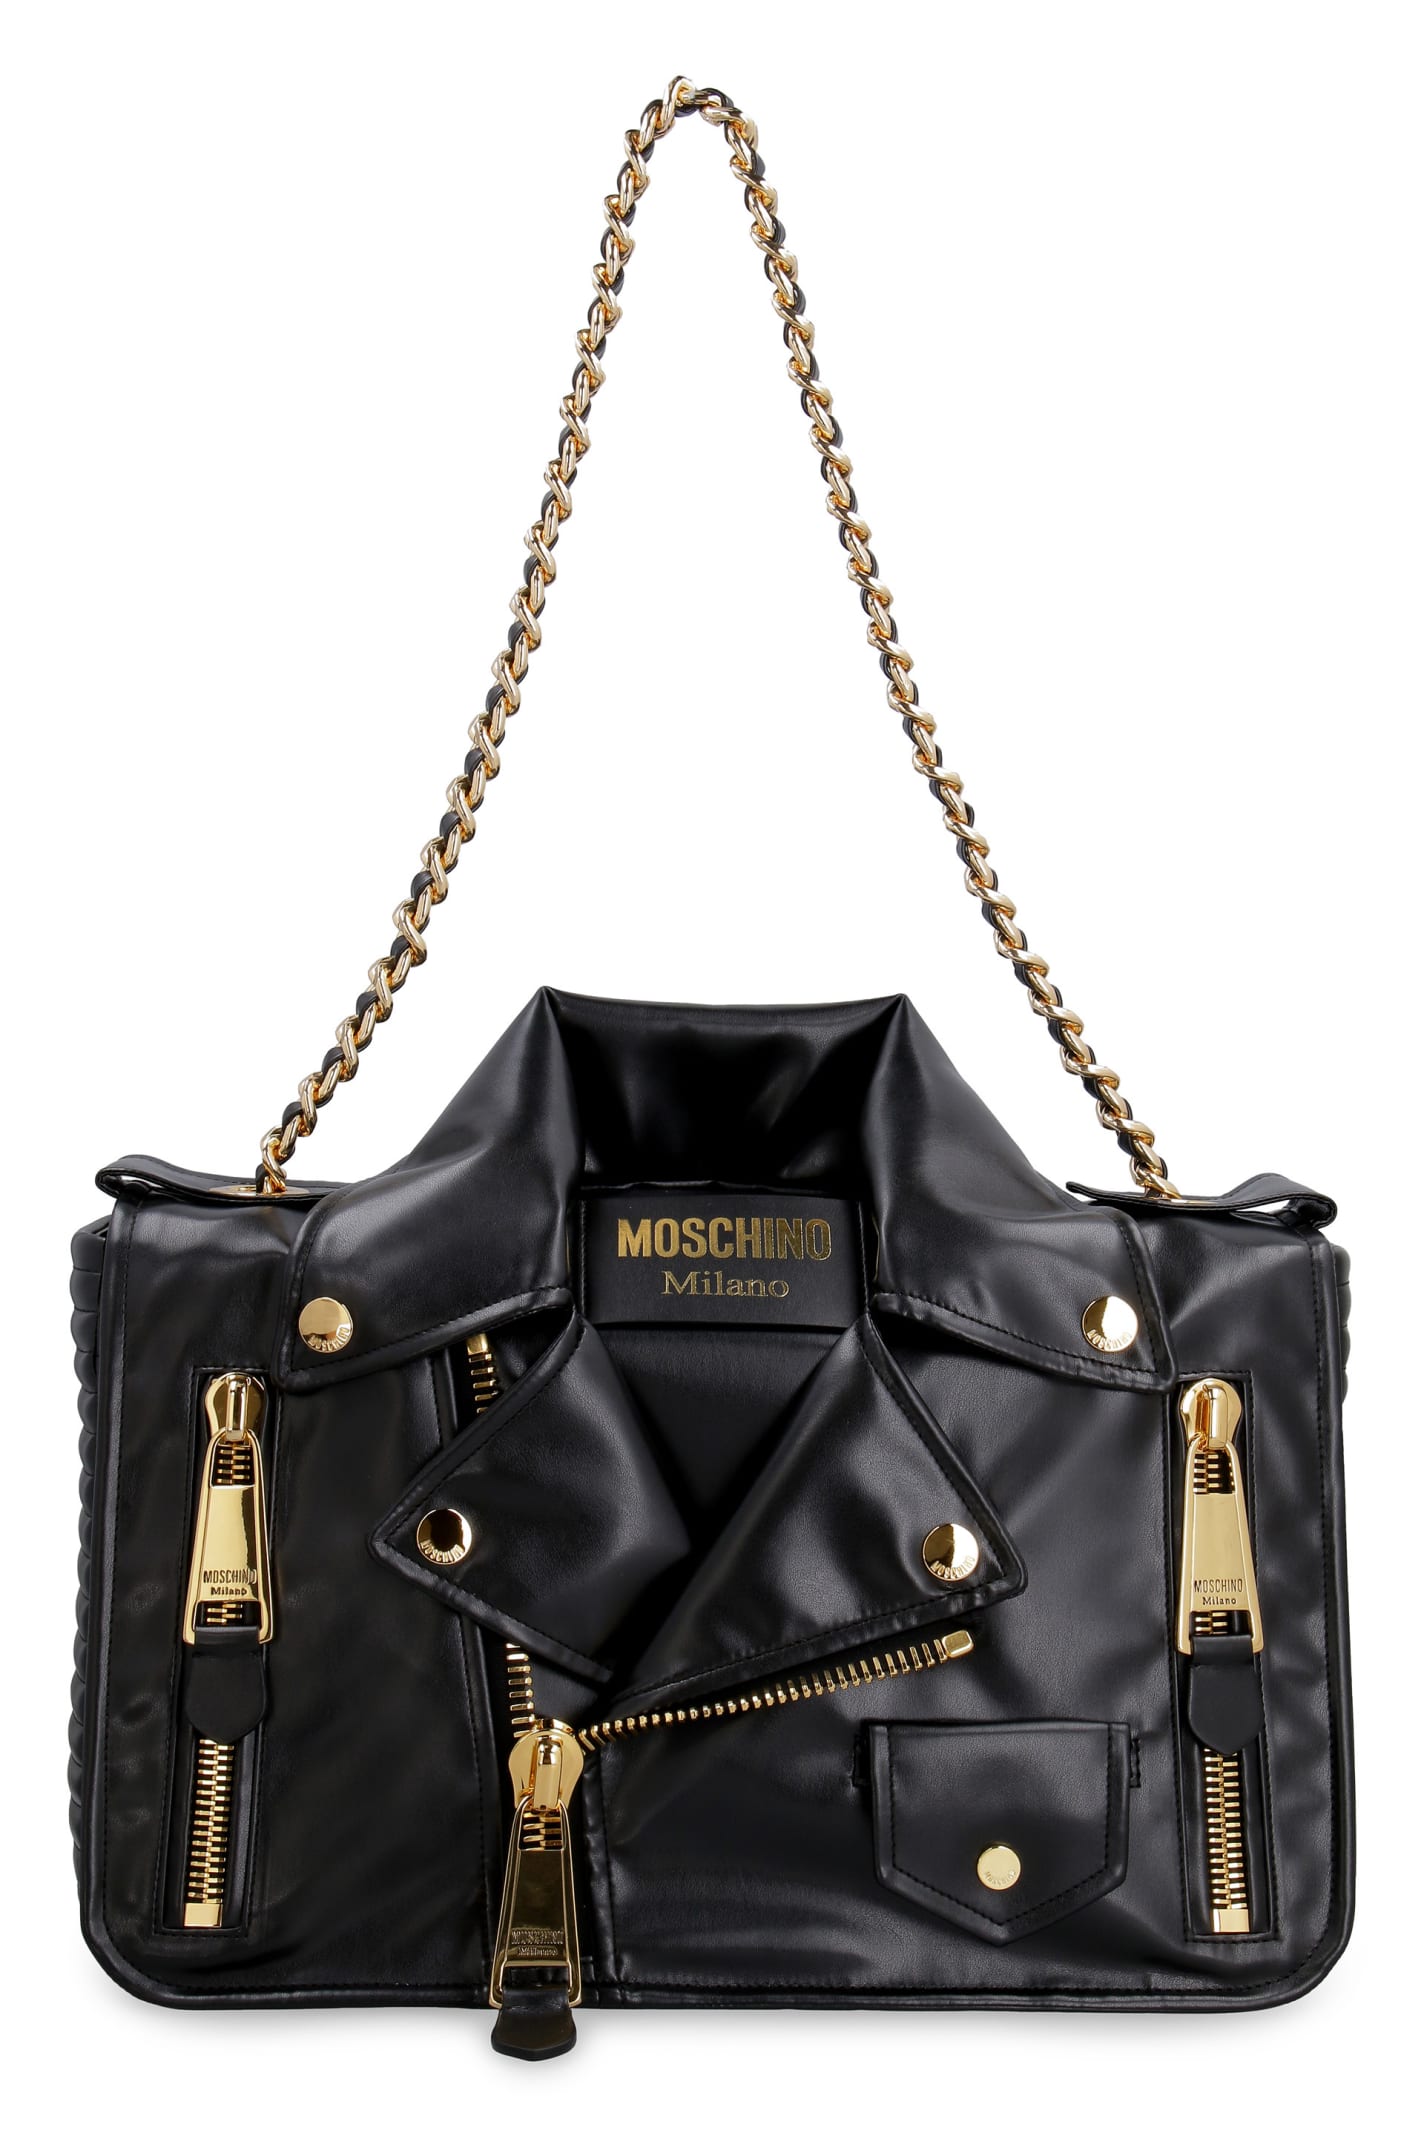 Moschino Shoulder Bags | italist, ALWAYS LIKE A SALE